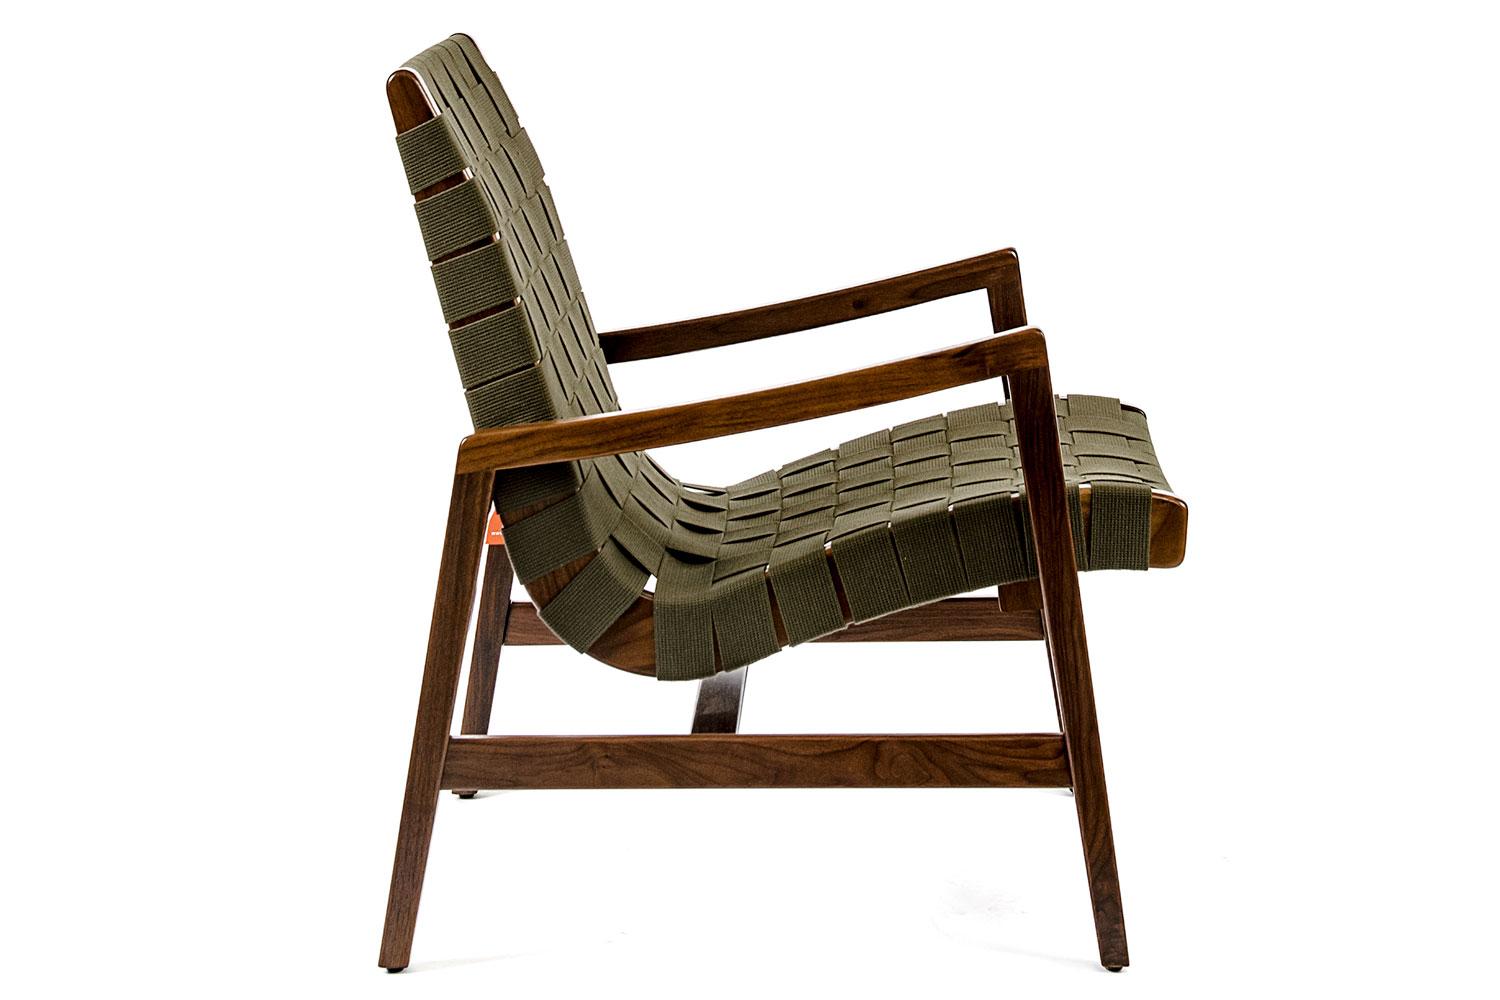 Risom lounge chair with arms by Knoll

A contemporary classic designed by Jens Risom for Knoll. These armed lounge chairs have a light walnut frame with Kahki colored 100% cotton webbing creating back and seat.

Jens Risom's designs were the